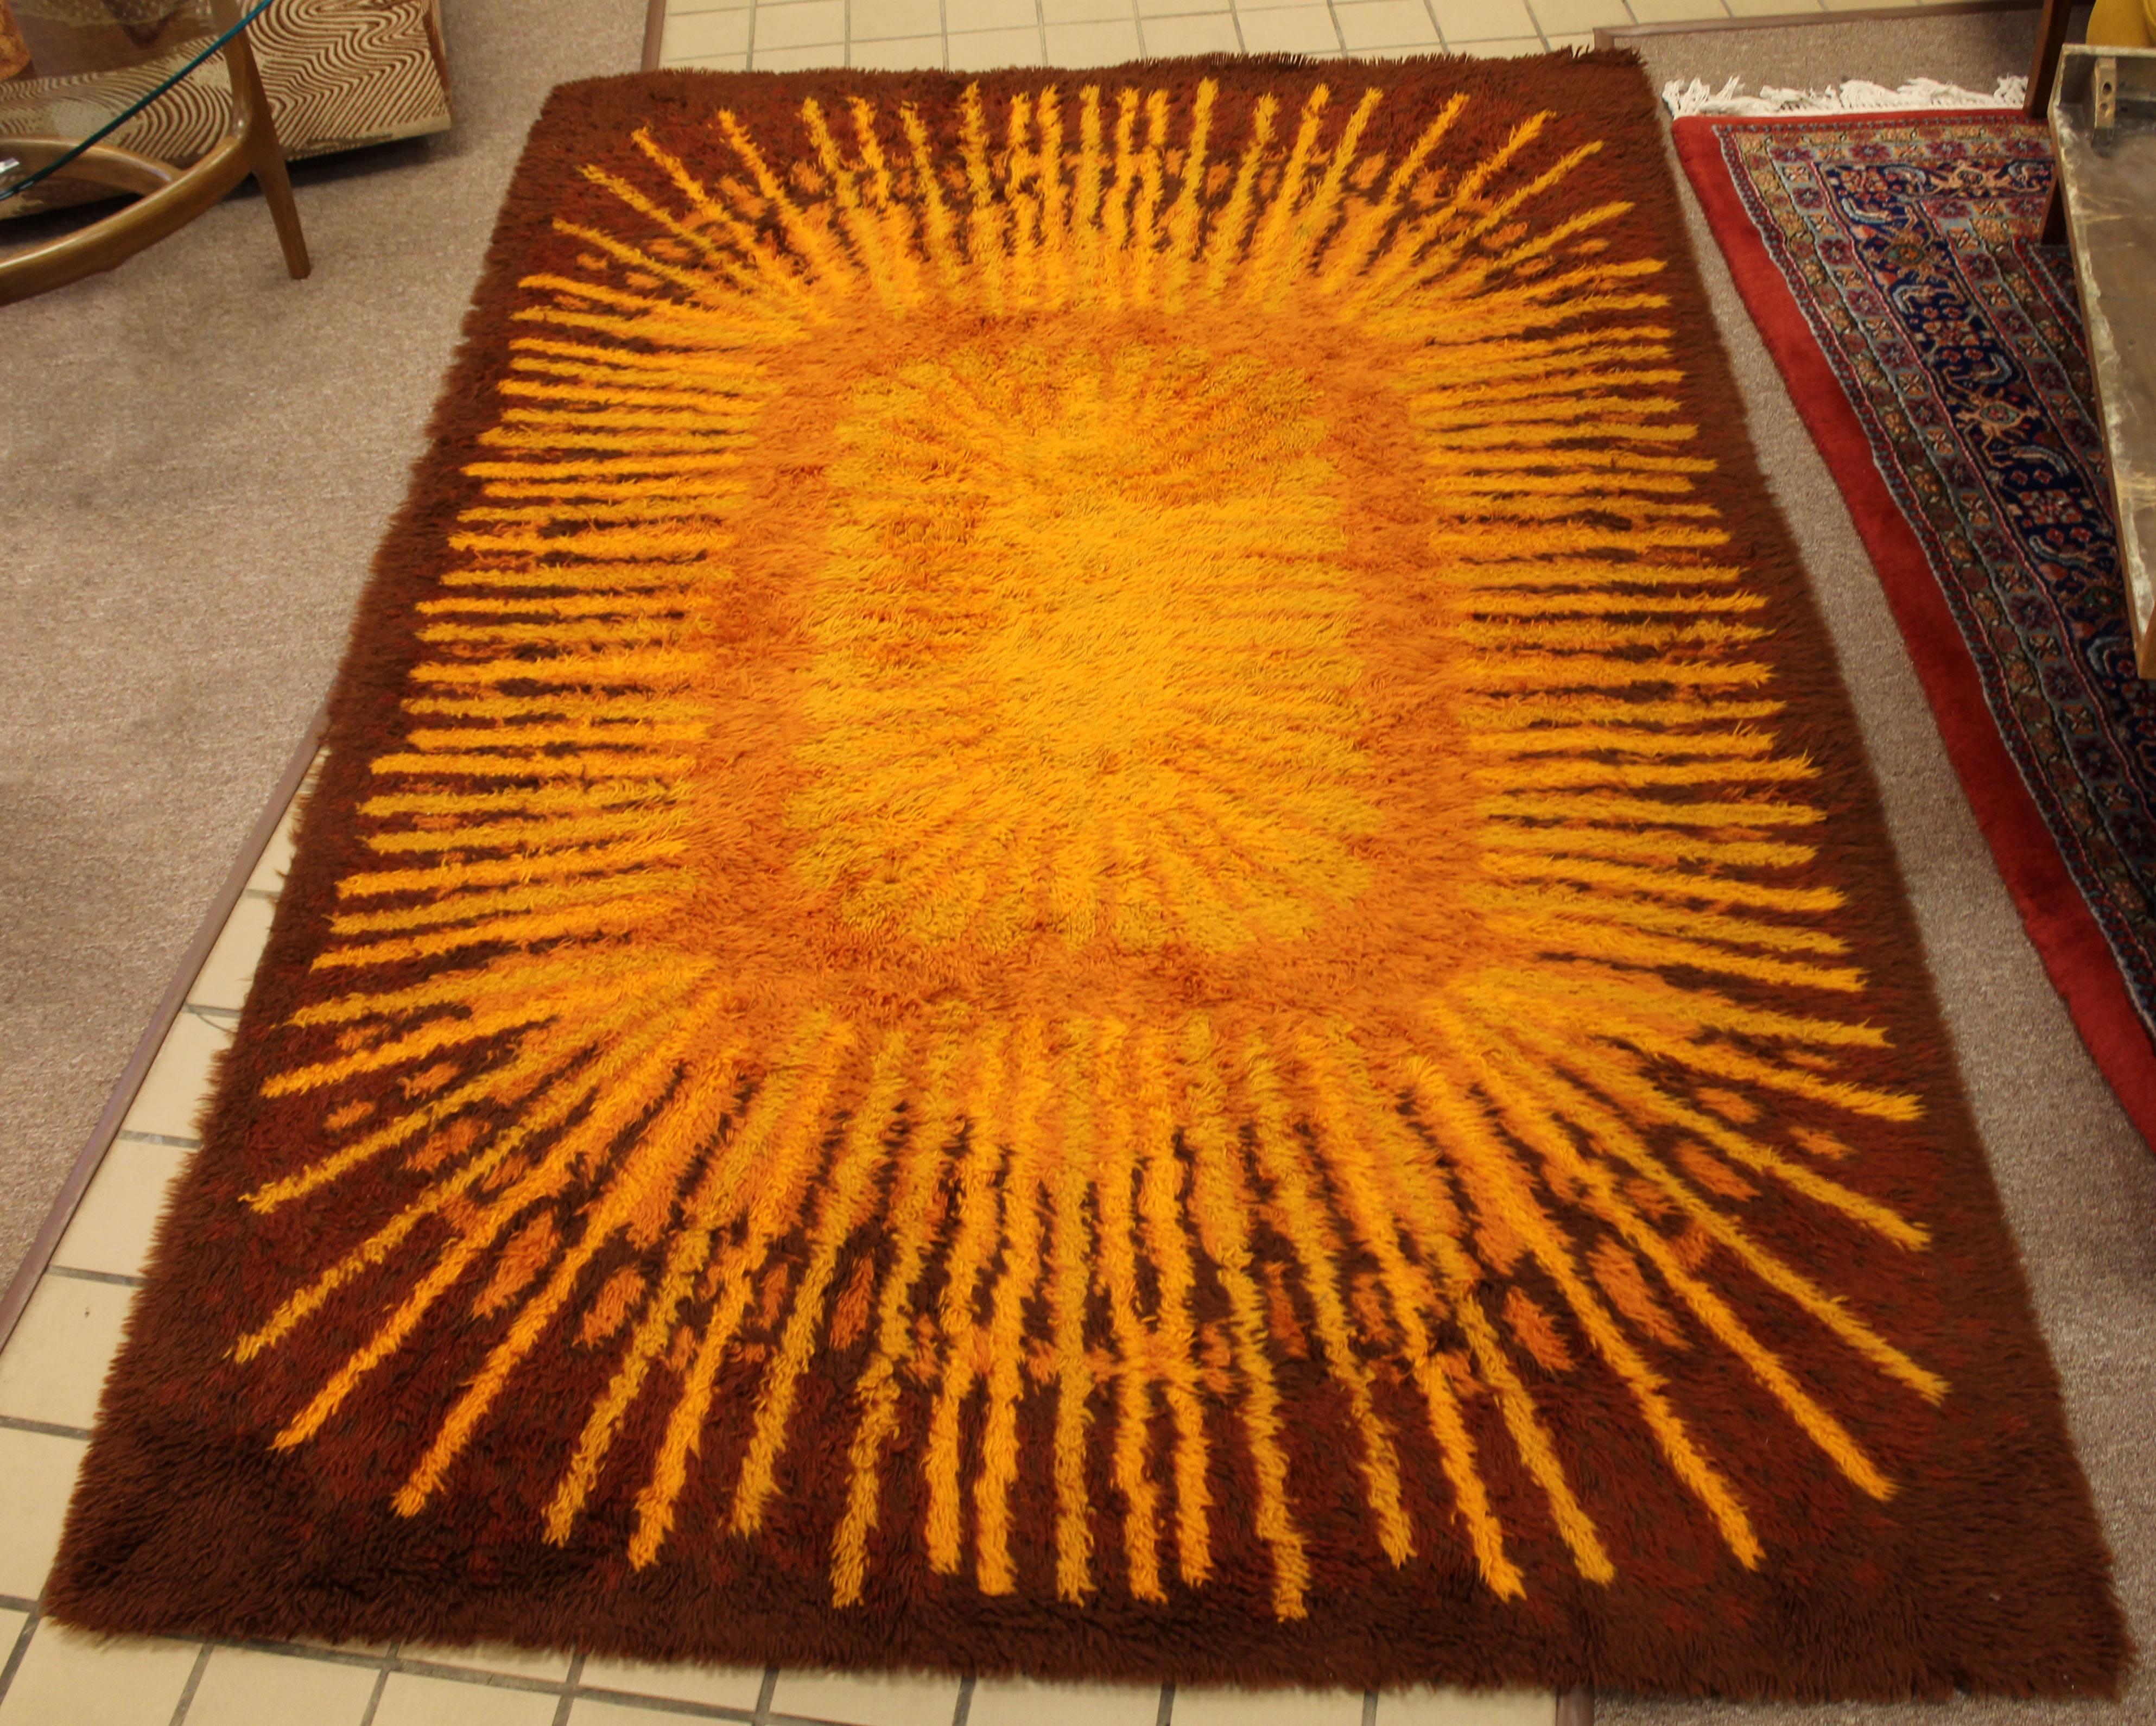 For your consideration is a wonderful, brown and yellow, rectangular Rya rug, circa 1960s-1970s. In excellent condition. The dimensions are 102